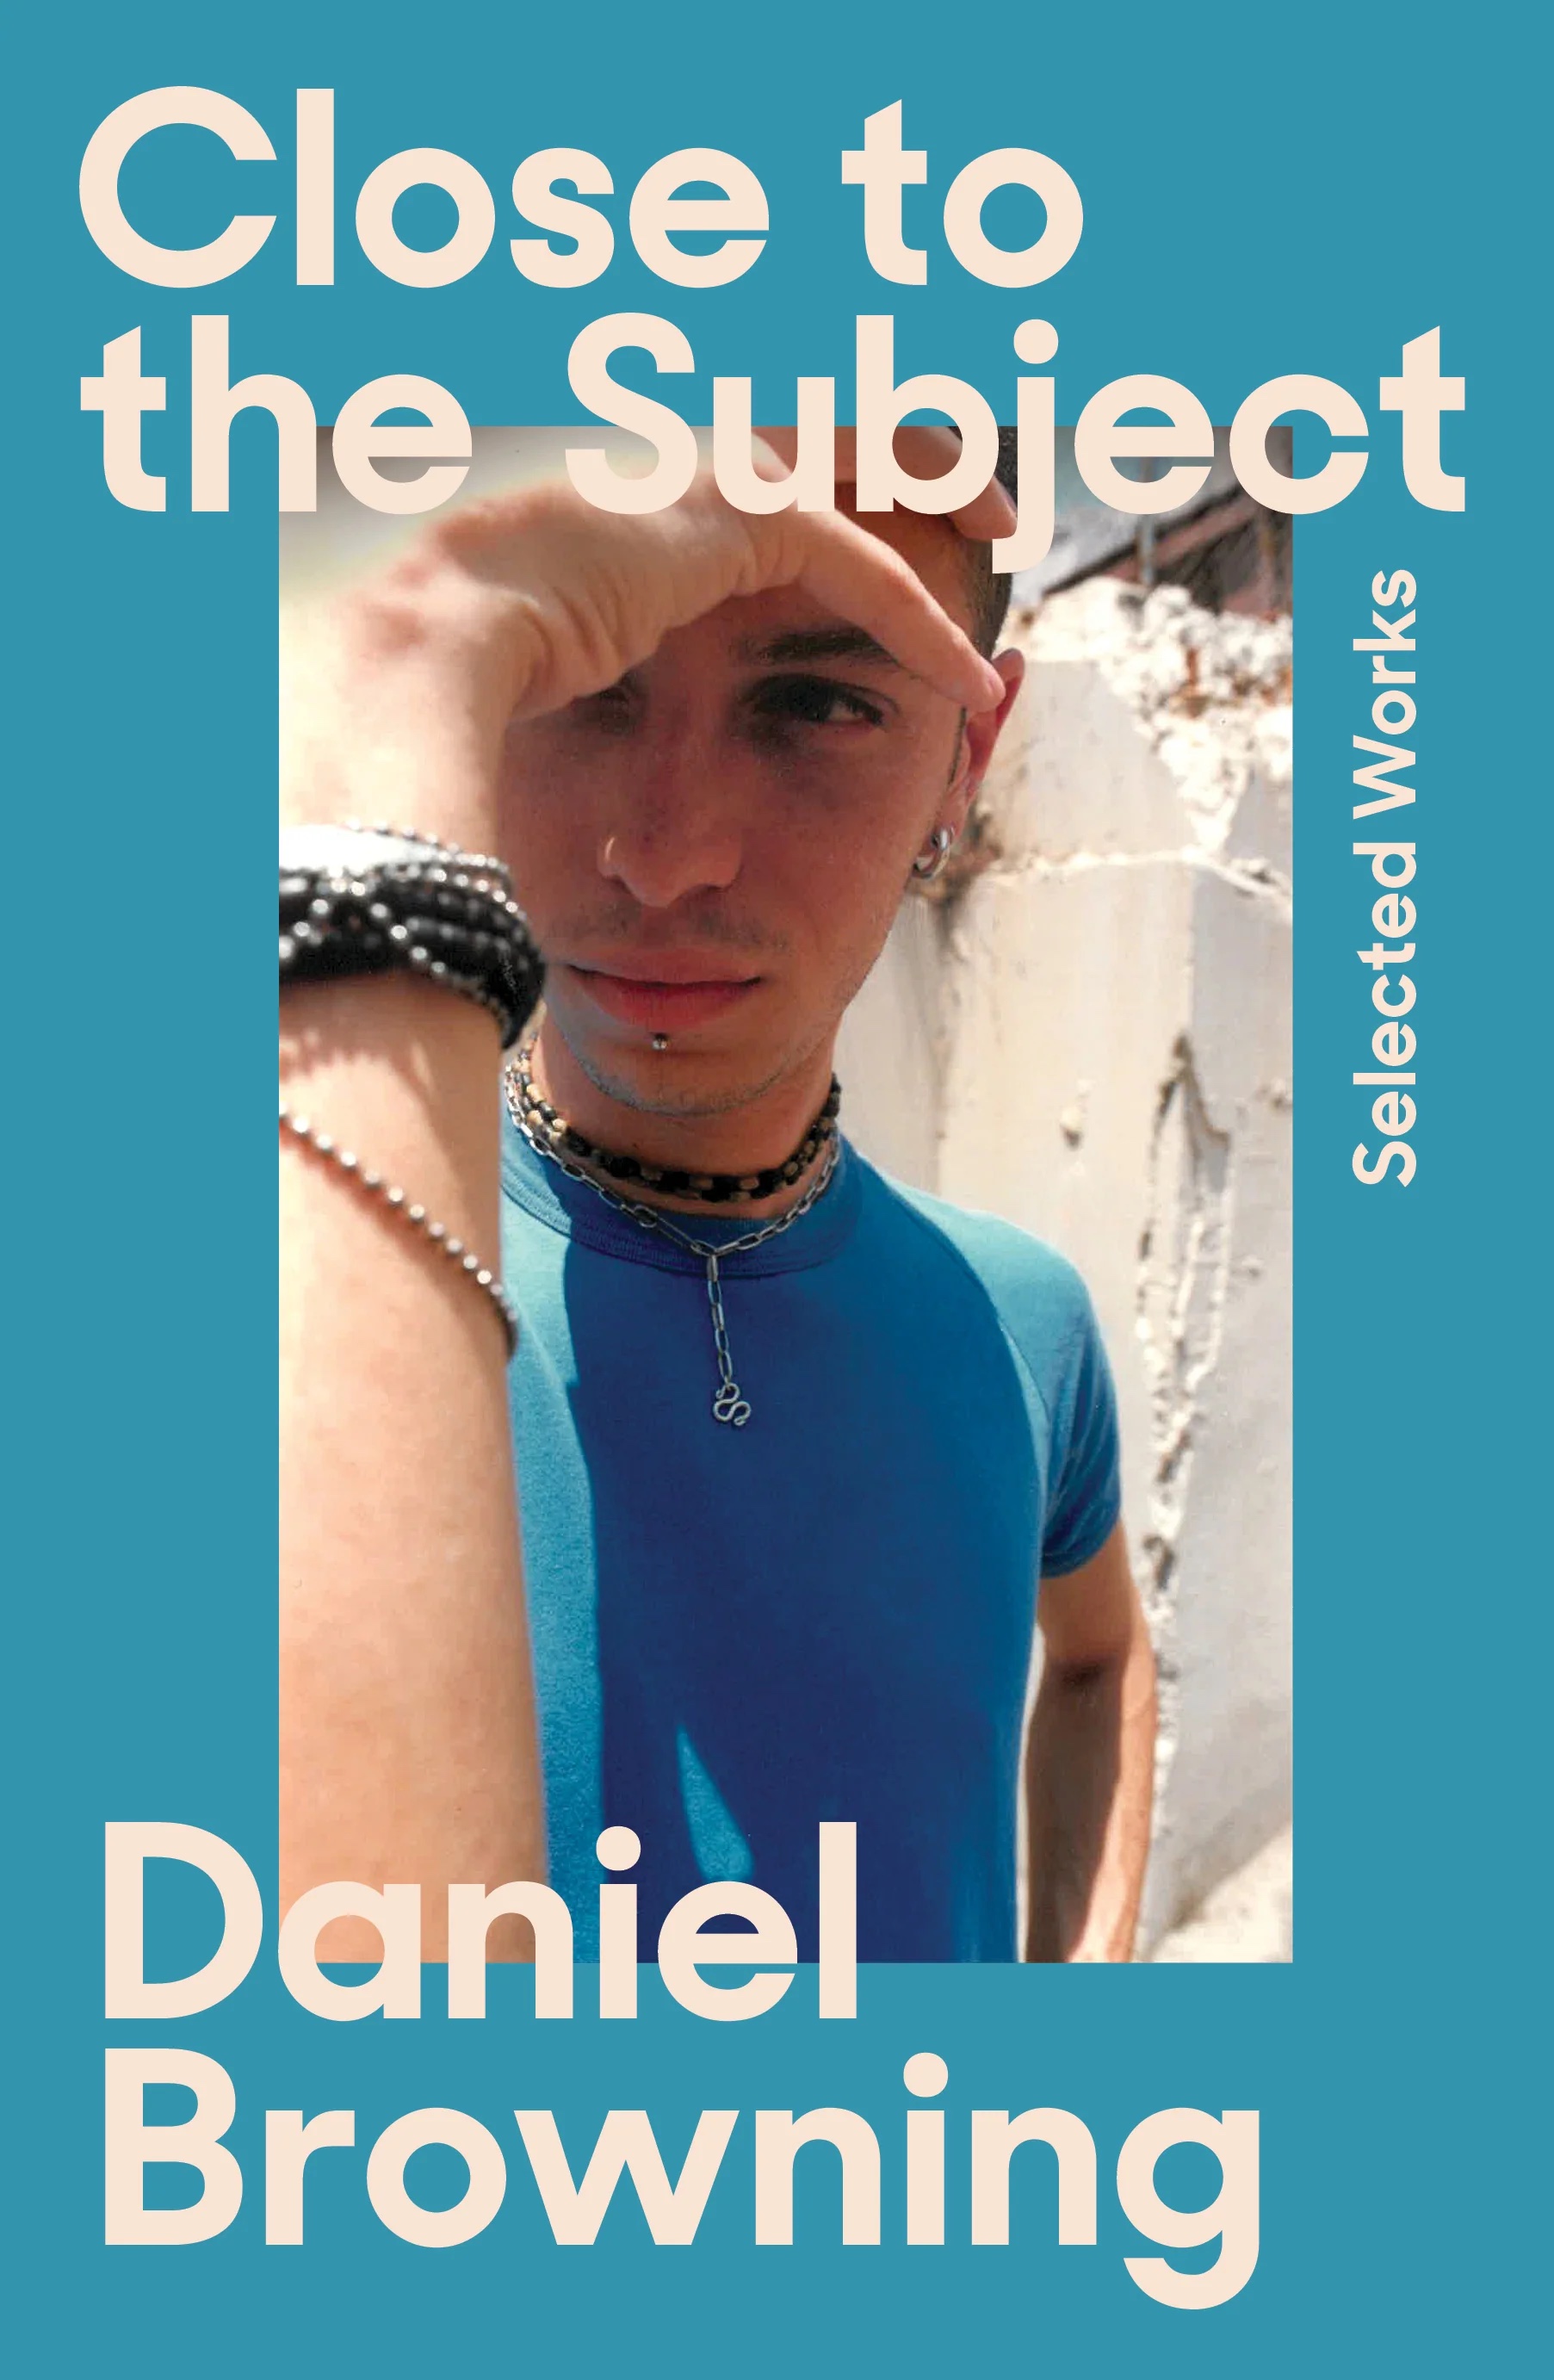 A book cover with a blue border showing a photograph of a young man wearing a blue t-shirt, with one hand shielding his eyes